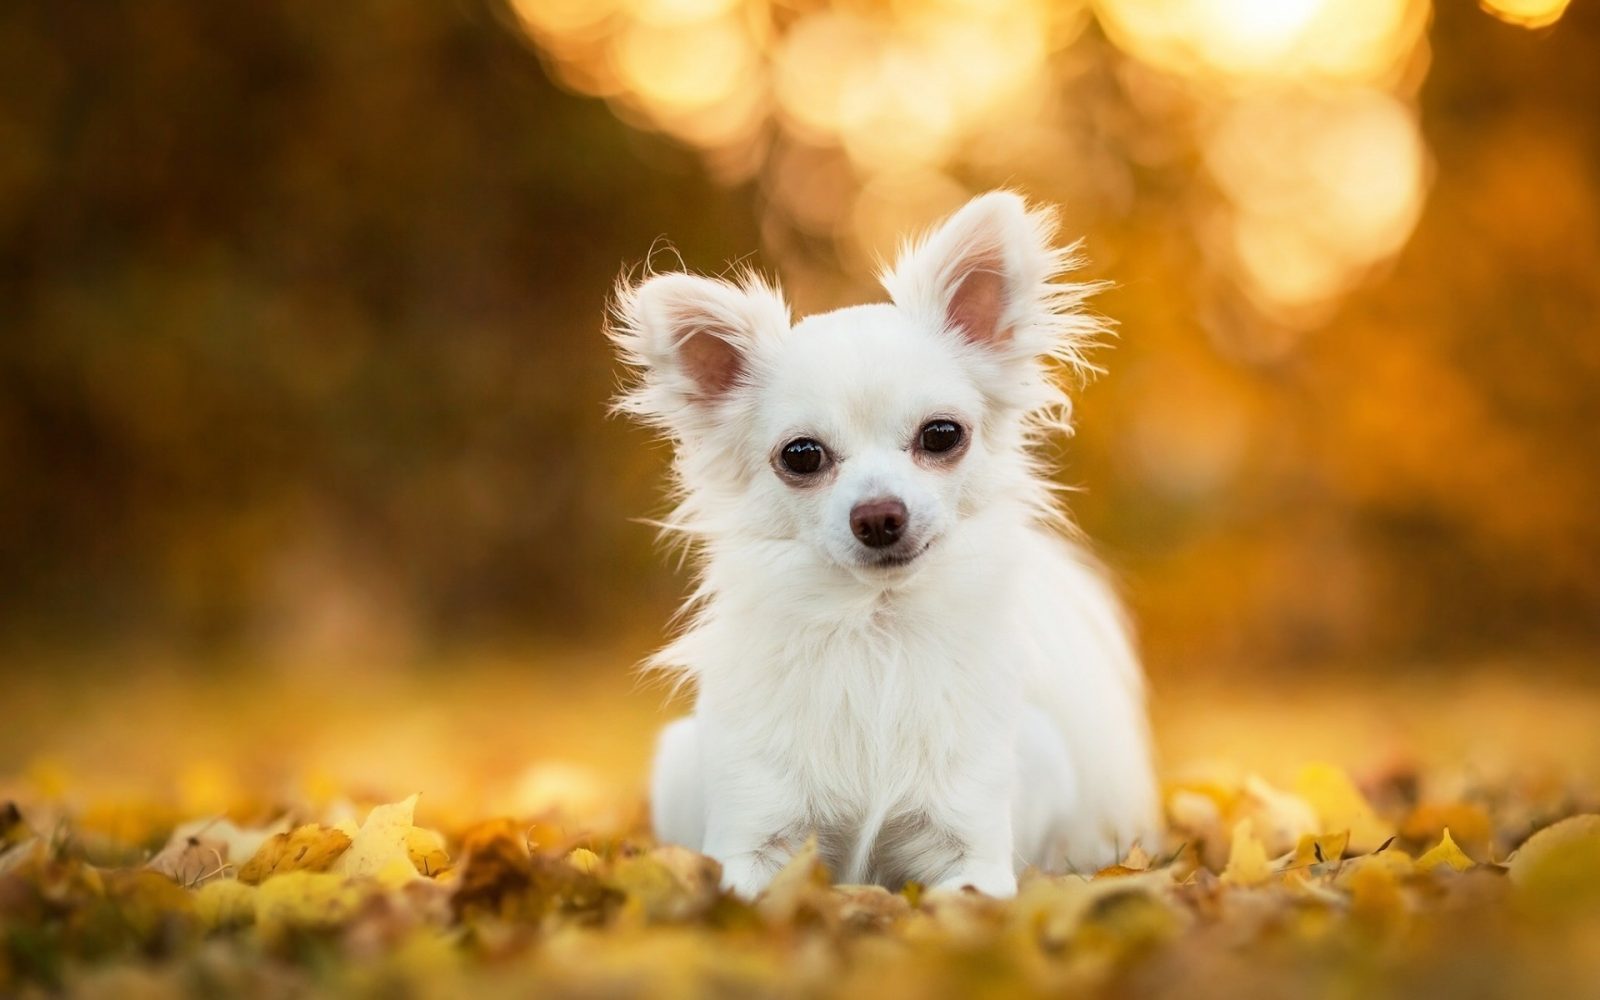 Please Tell Me You'll Be Able to Pass This Moderately Easy Random Knowledge Quiz Chihuahua